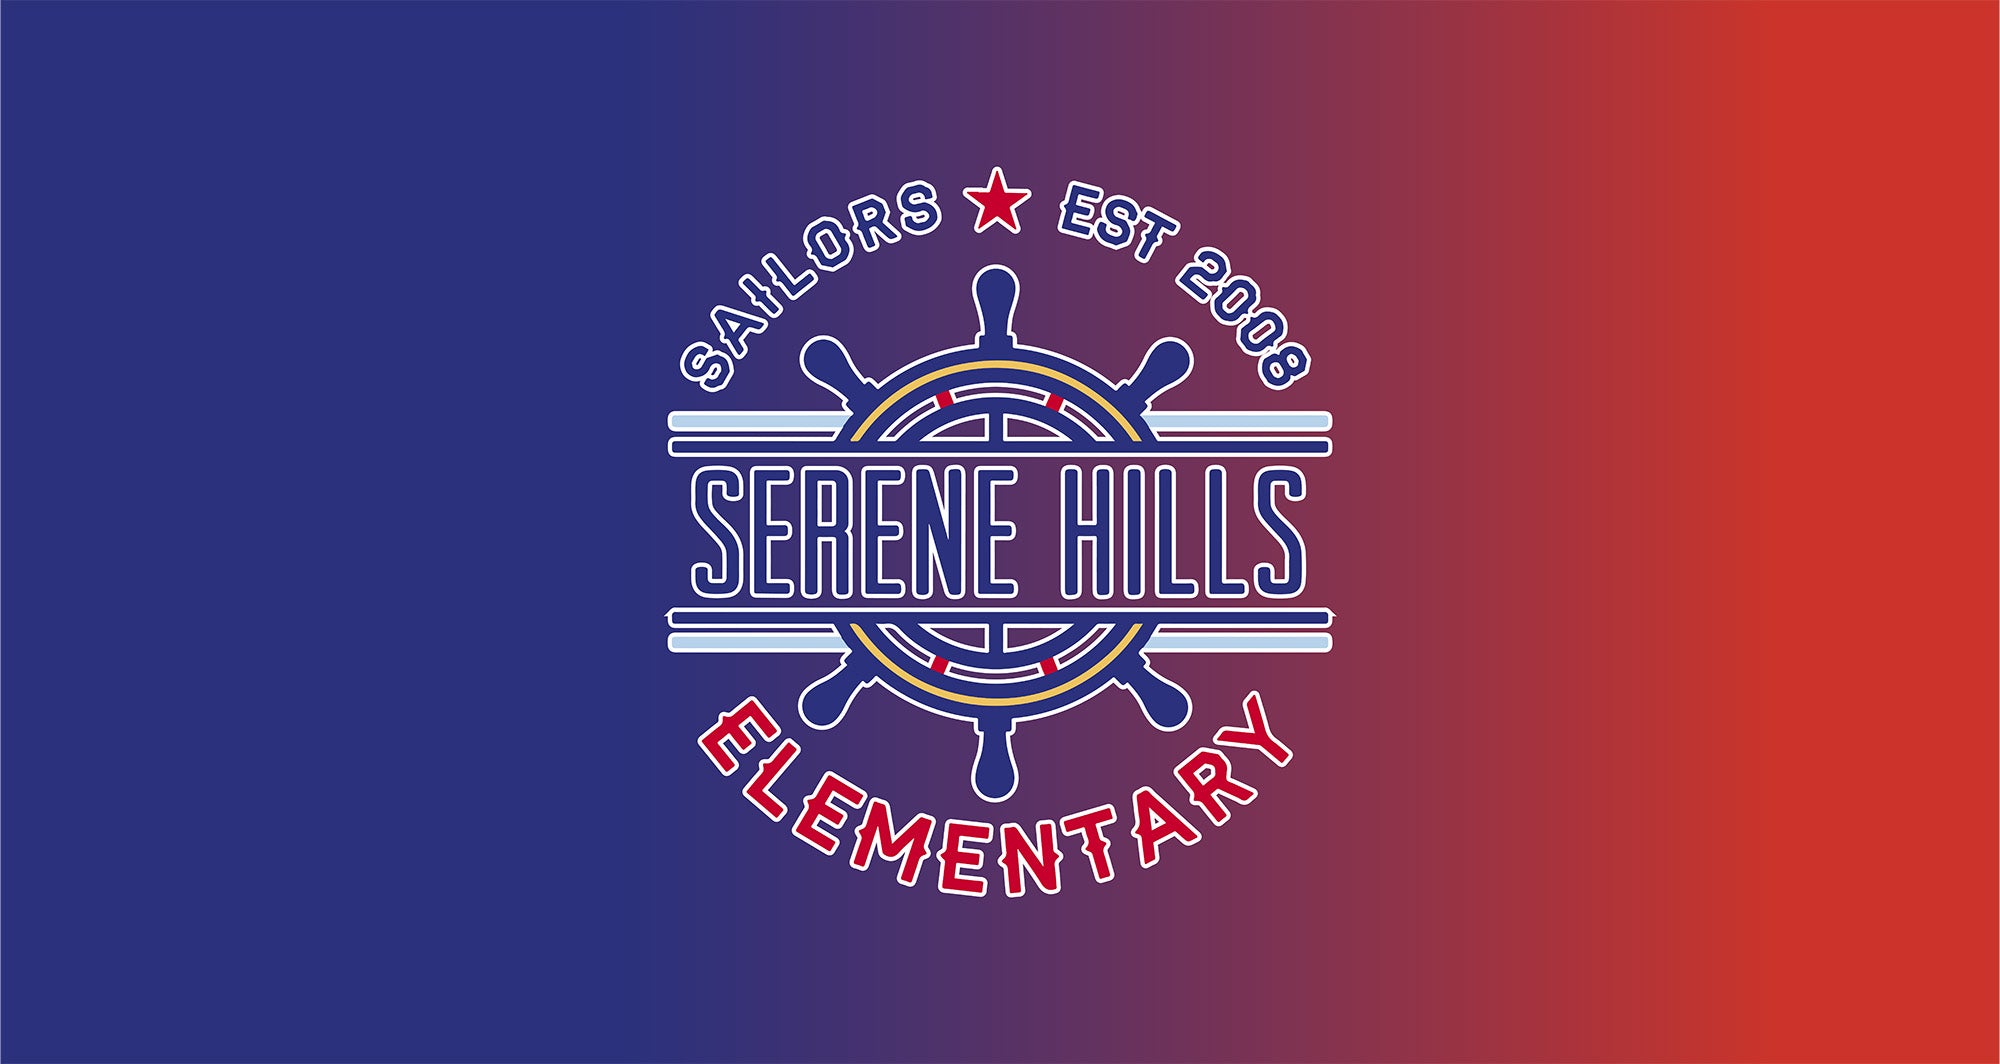 Serene hills elemetary school logo on a red and blue gradient background. 